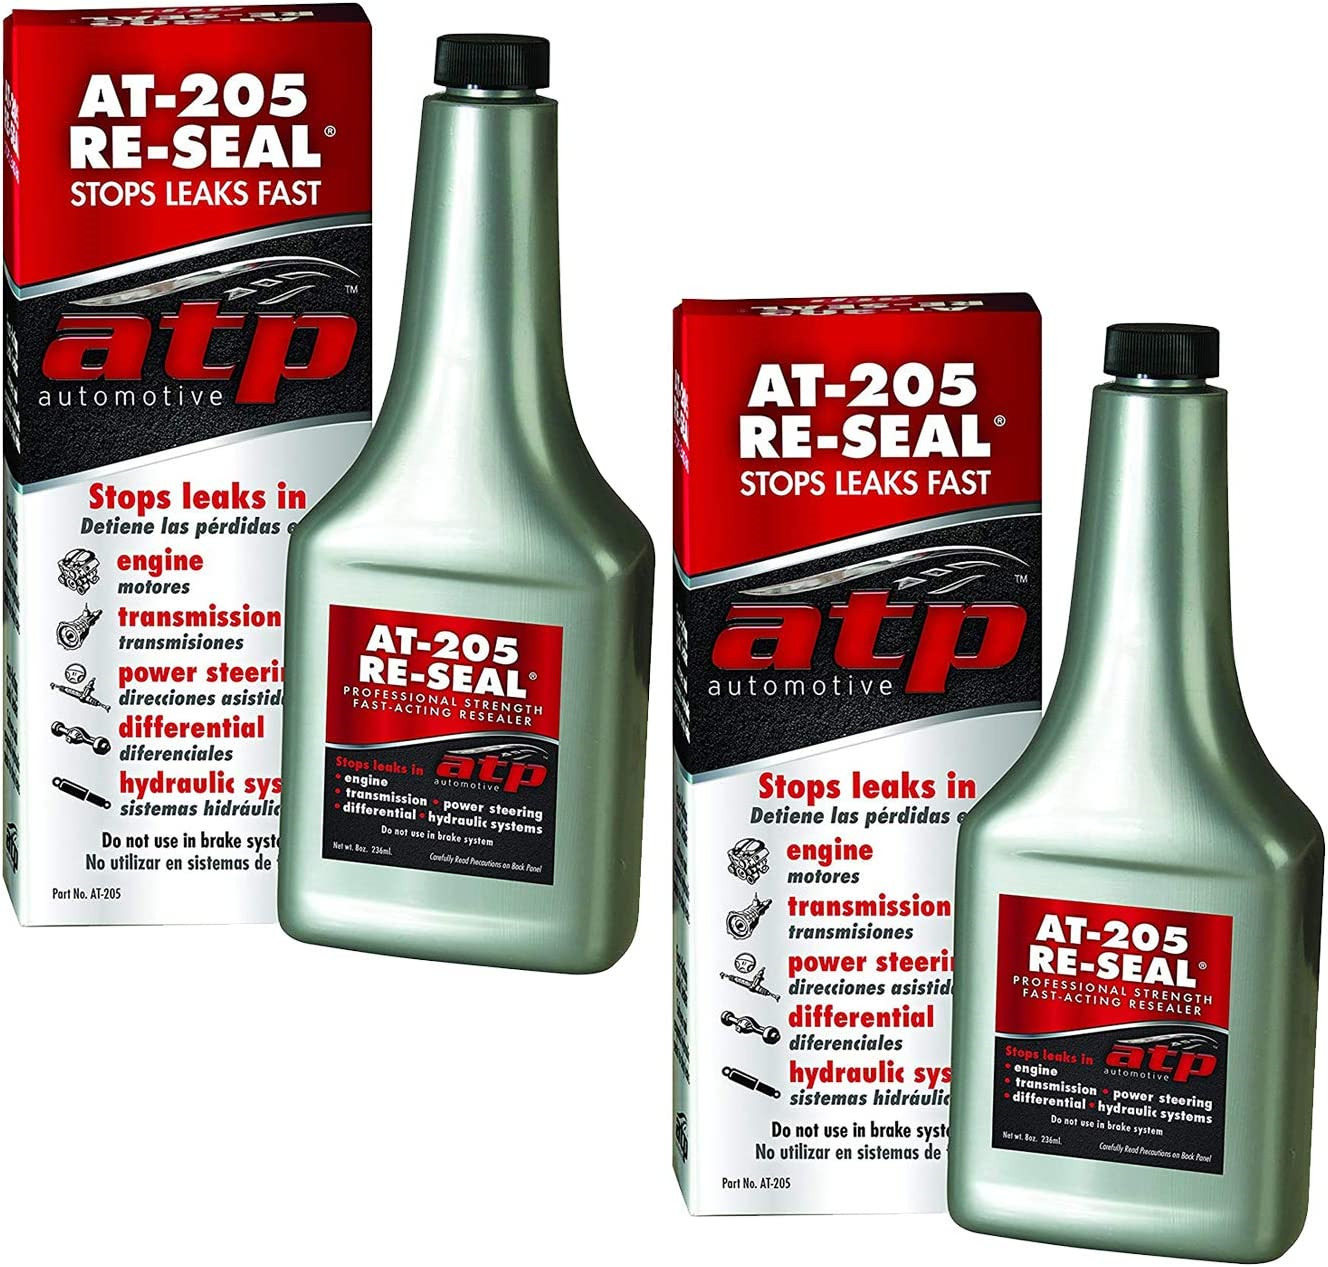 ATP Automotive AT-205 Re-Seal Stops Leaks, 8 Ounce Bottle 2 Pack